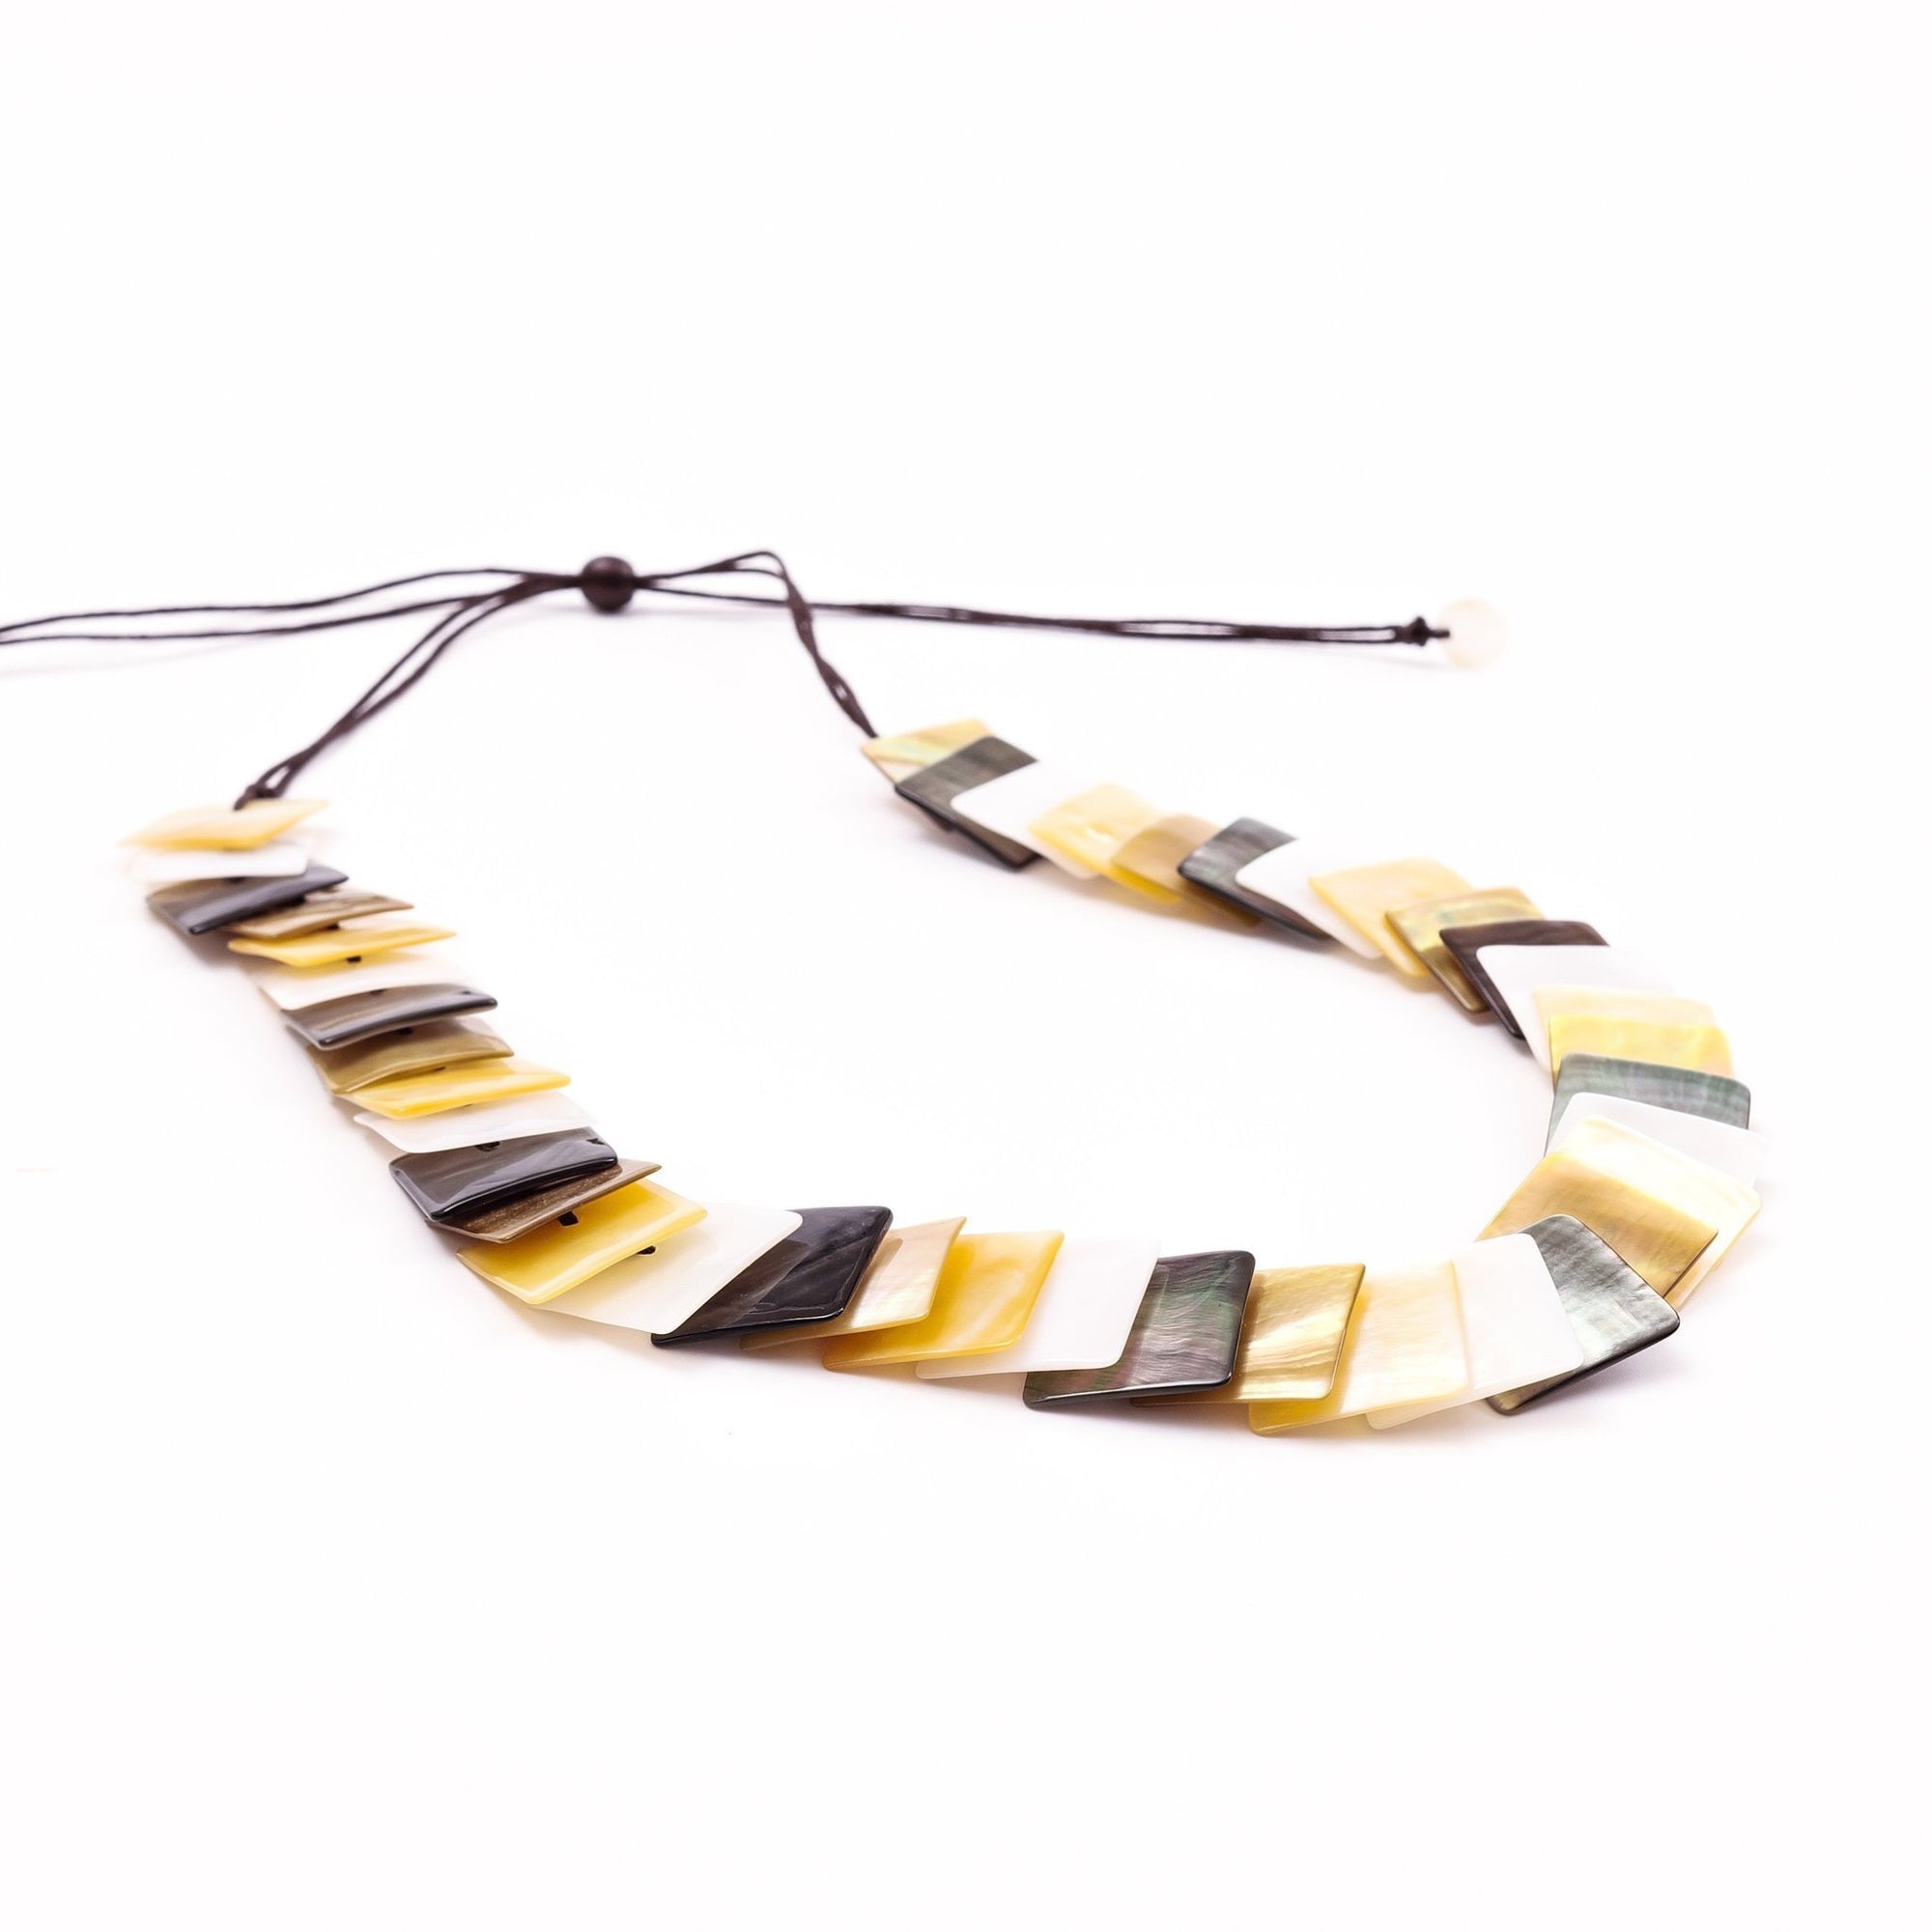 Jewelry - Mother of Pearl Squares Necklace - Multicolor | LIKHÂ - LIKHÂ